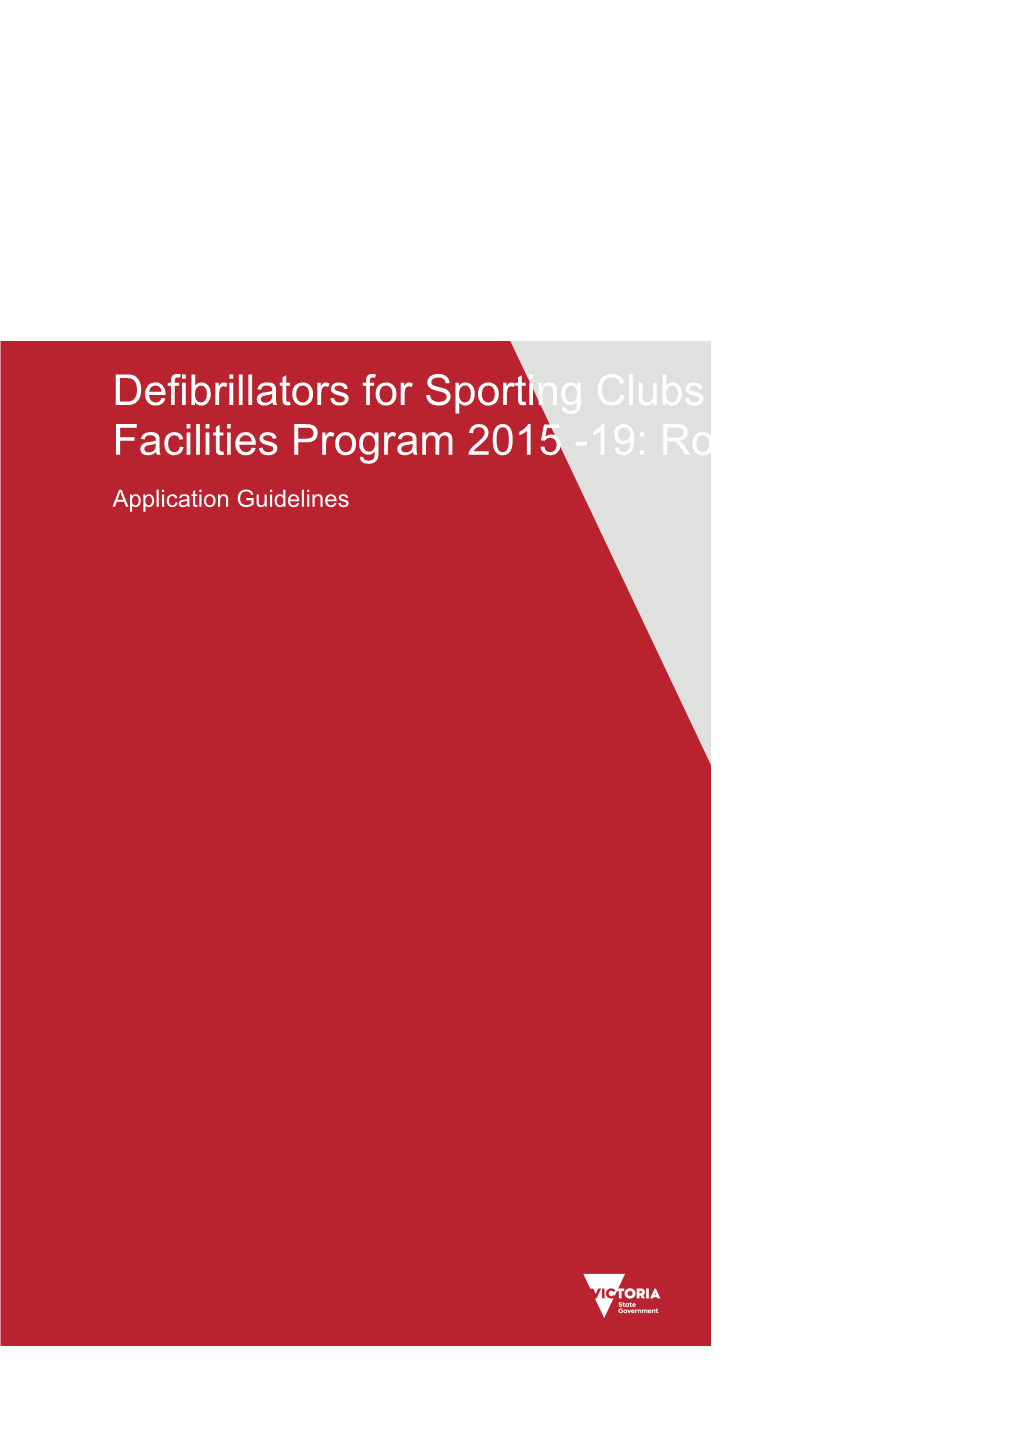 Defibrillators for Sporting Clubs and Facilities Program-Round Four Guidelines